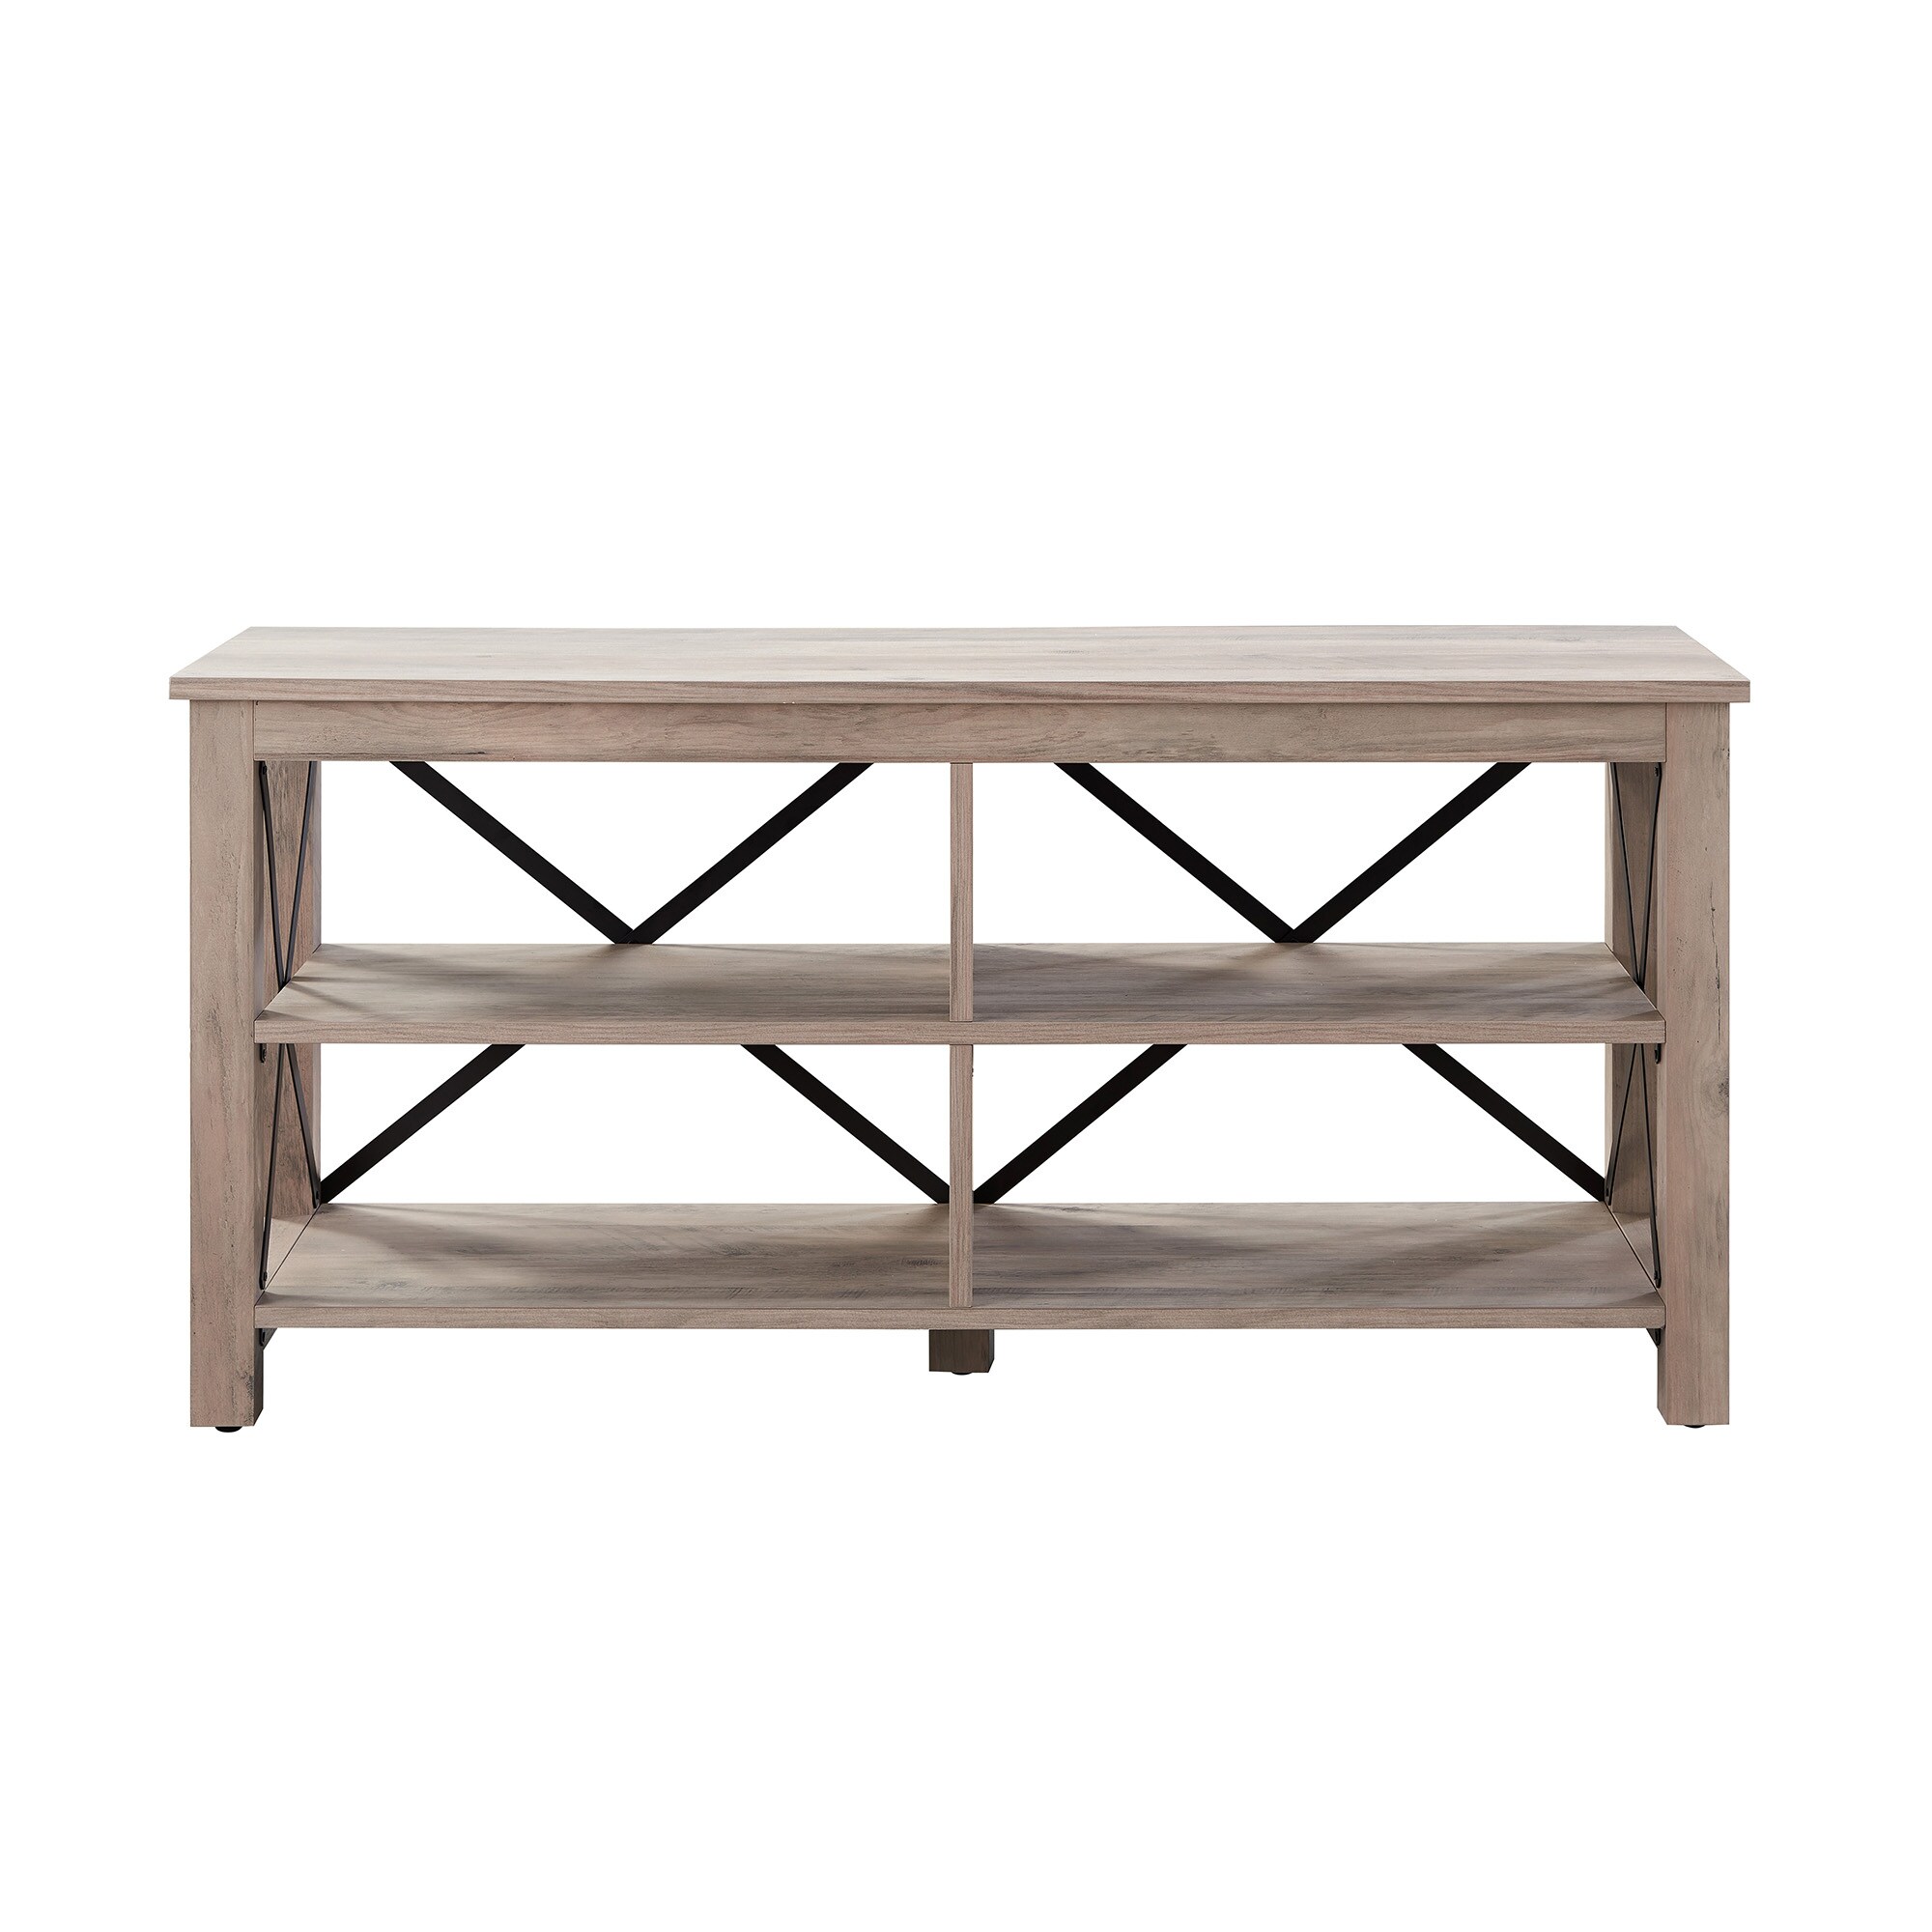 Hailey Home Sawyer Modern/Contemporary Gray Oak Tv Stand (Accommodates ...